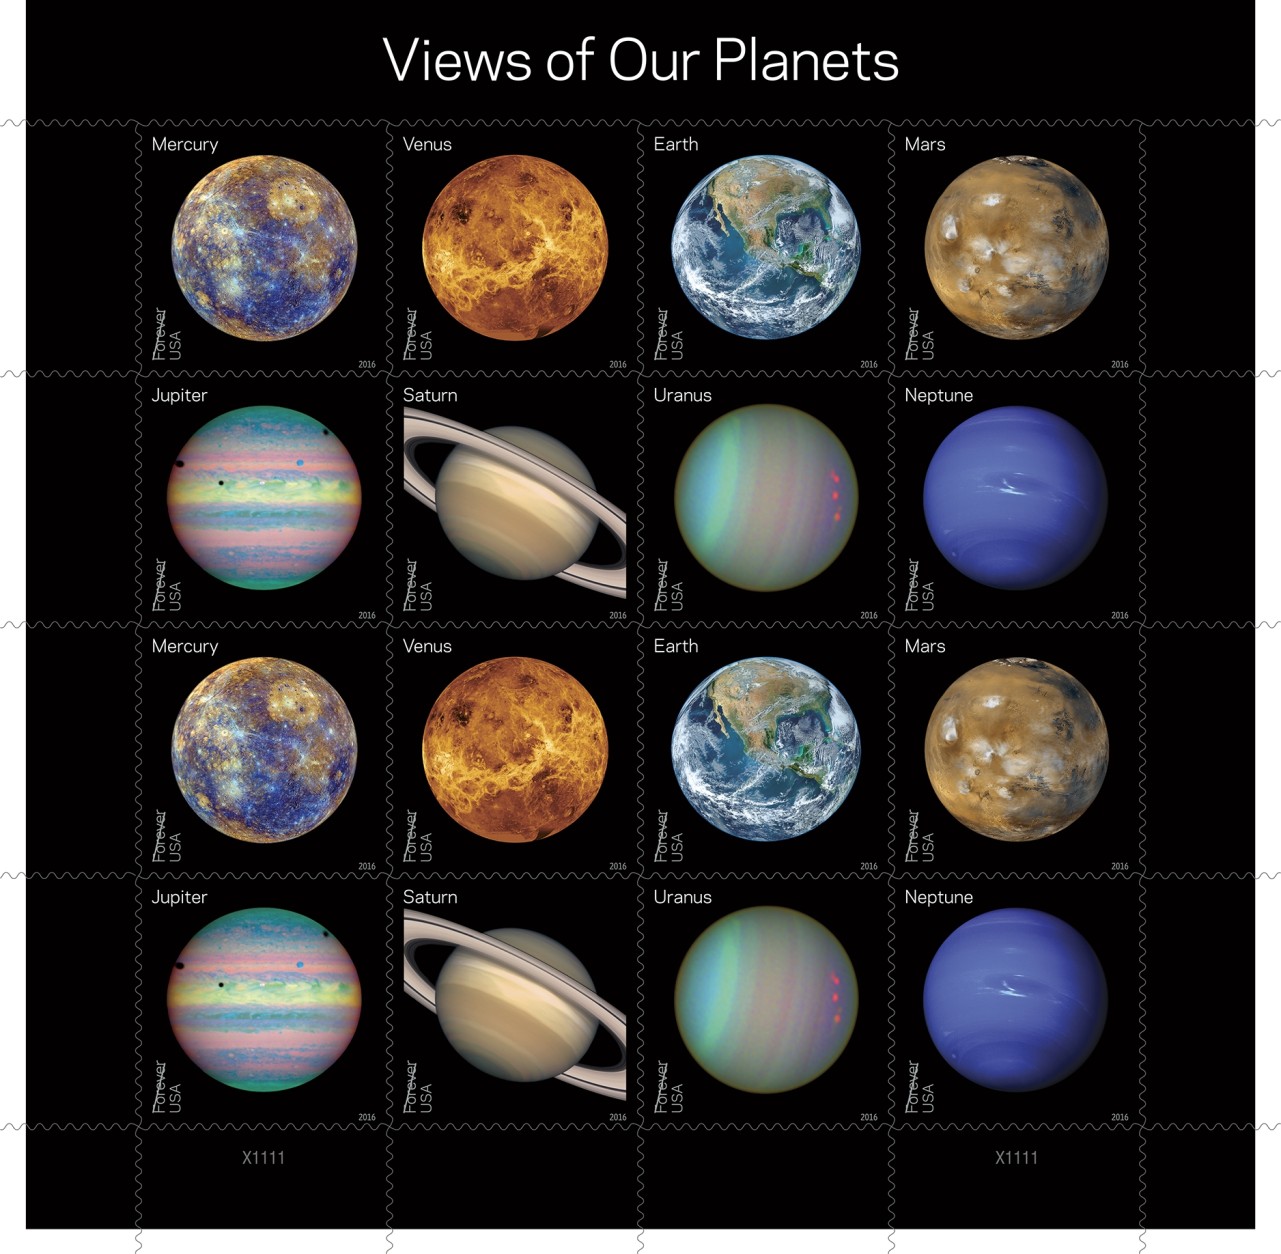 Views of Our Planets (&copy; 2016 USPS)